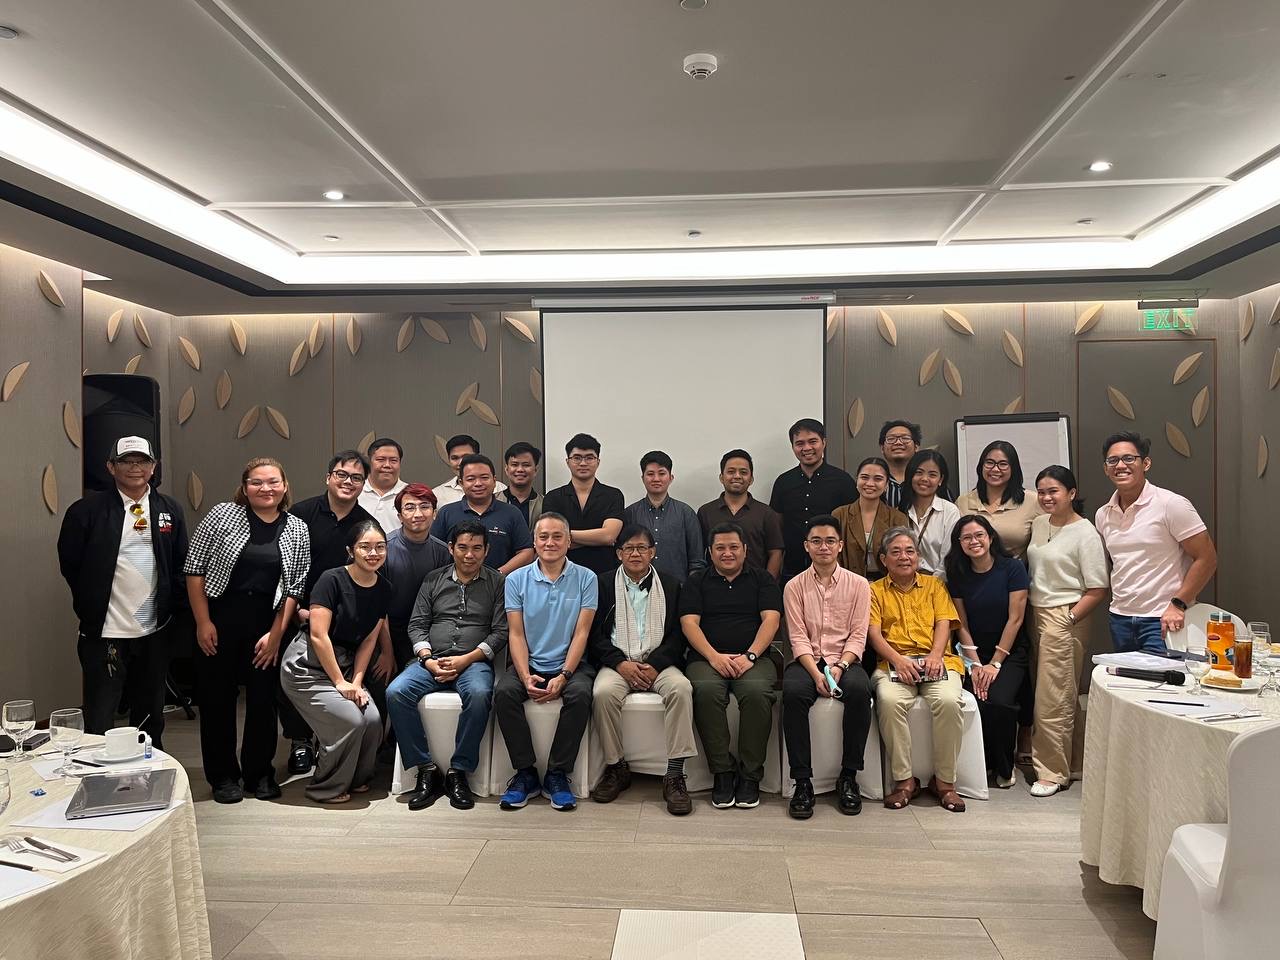 Photo Documentation of the stakeholders for the Alcohol Regulation Campaign hosted by the Action for Economic Reforms (AER) | Held November 30, 2023 in Quezon City, Manila, Philippines | ISSUP Philippine Chapter represented by Dr. Paul Lawrence Filomeno (second from the right in the backmost row).